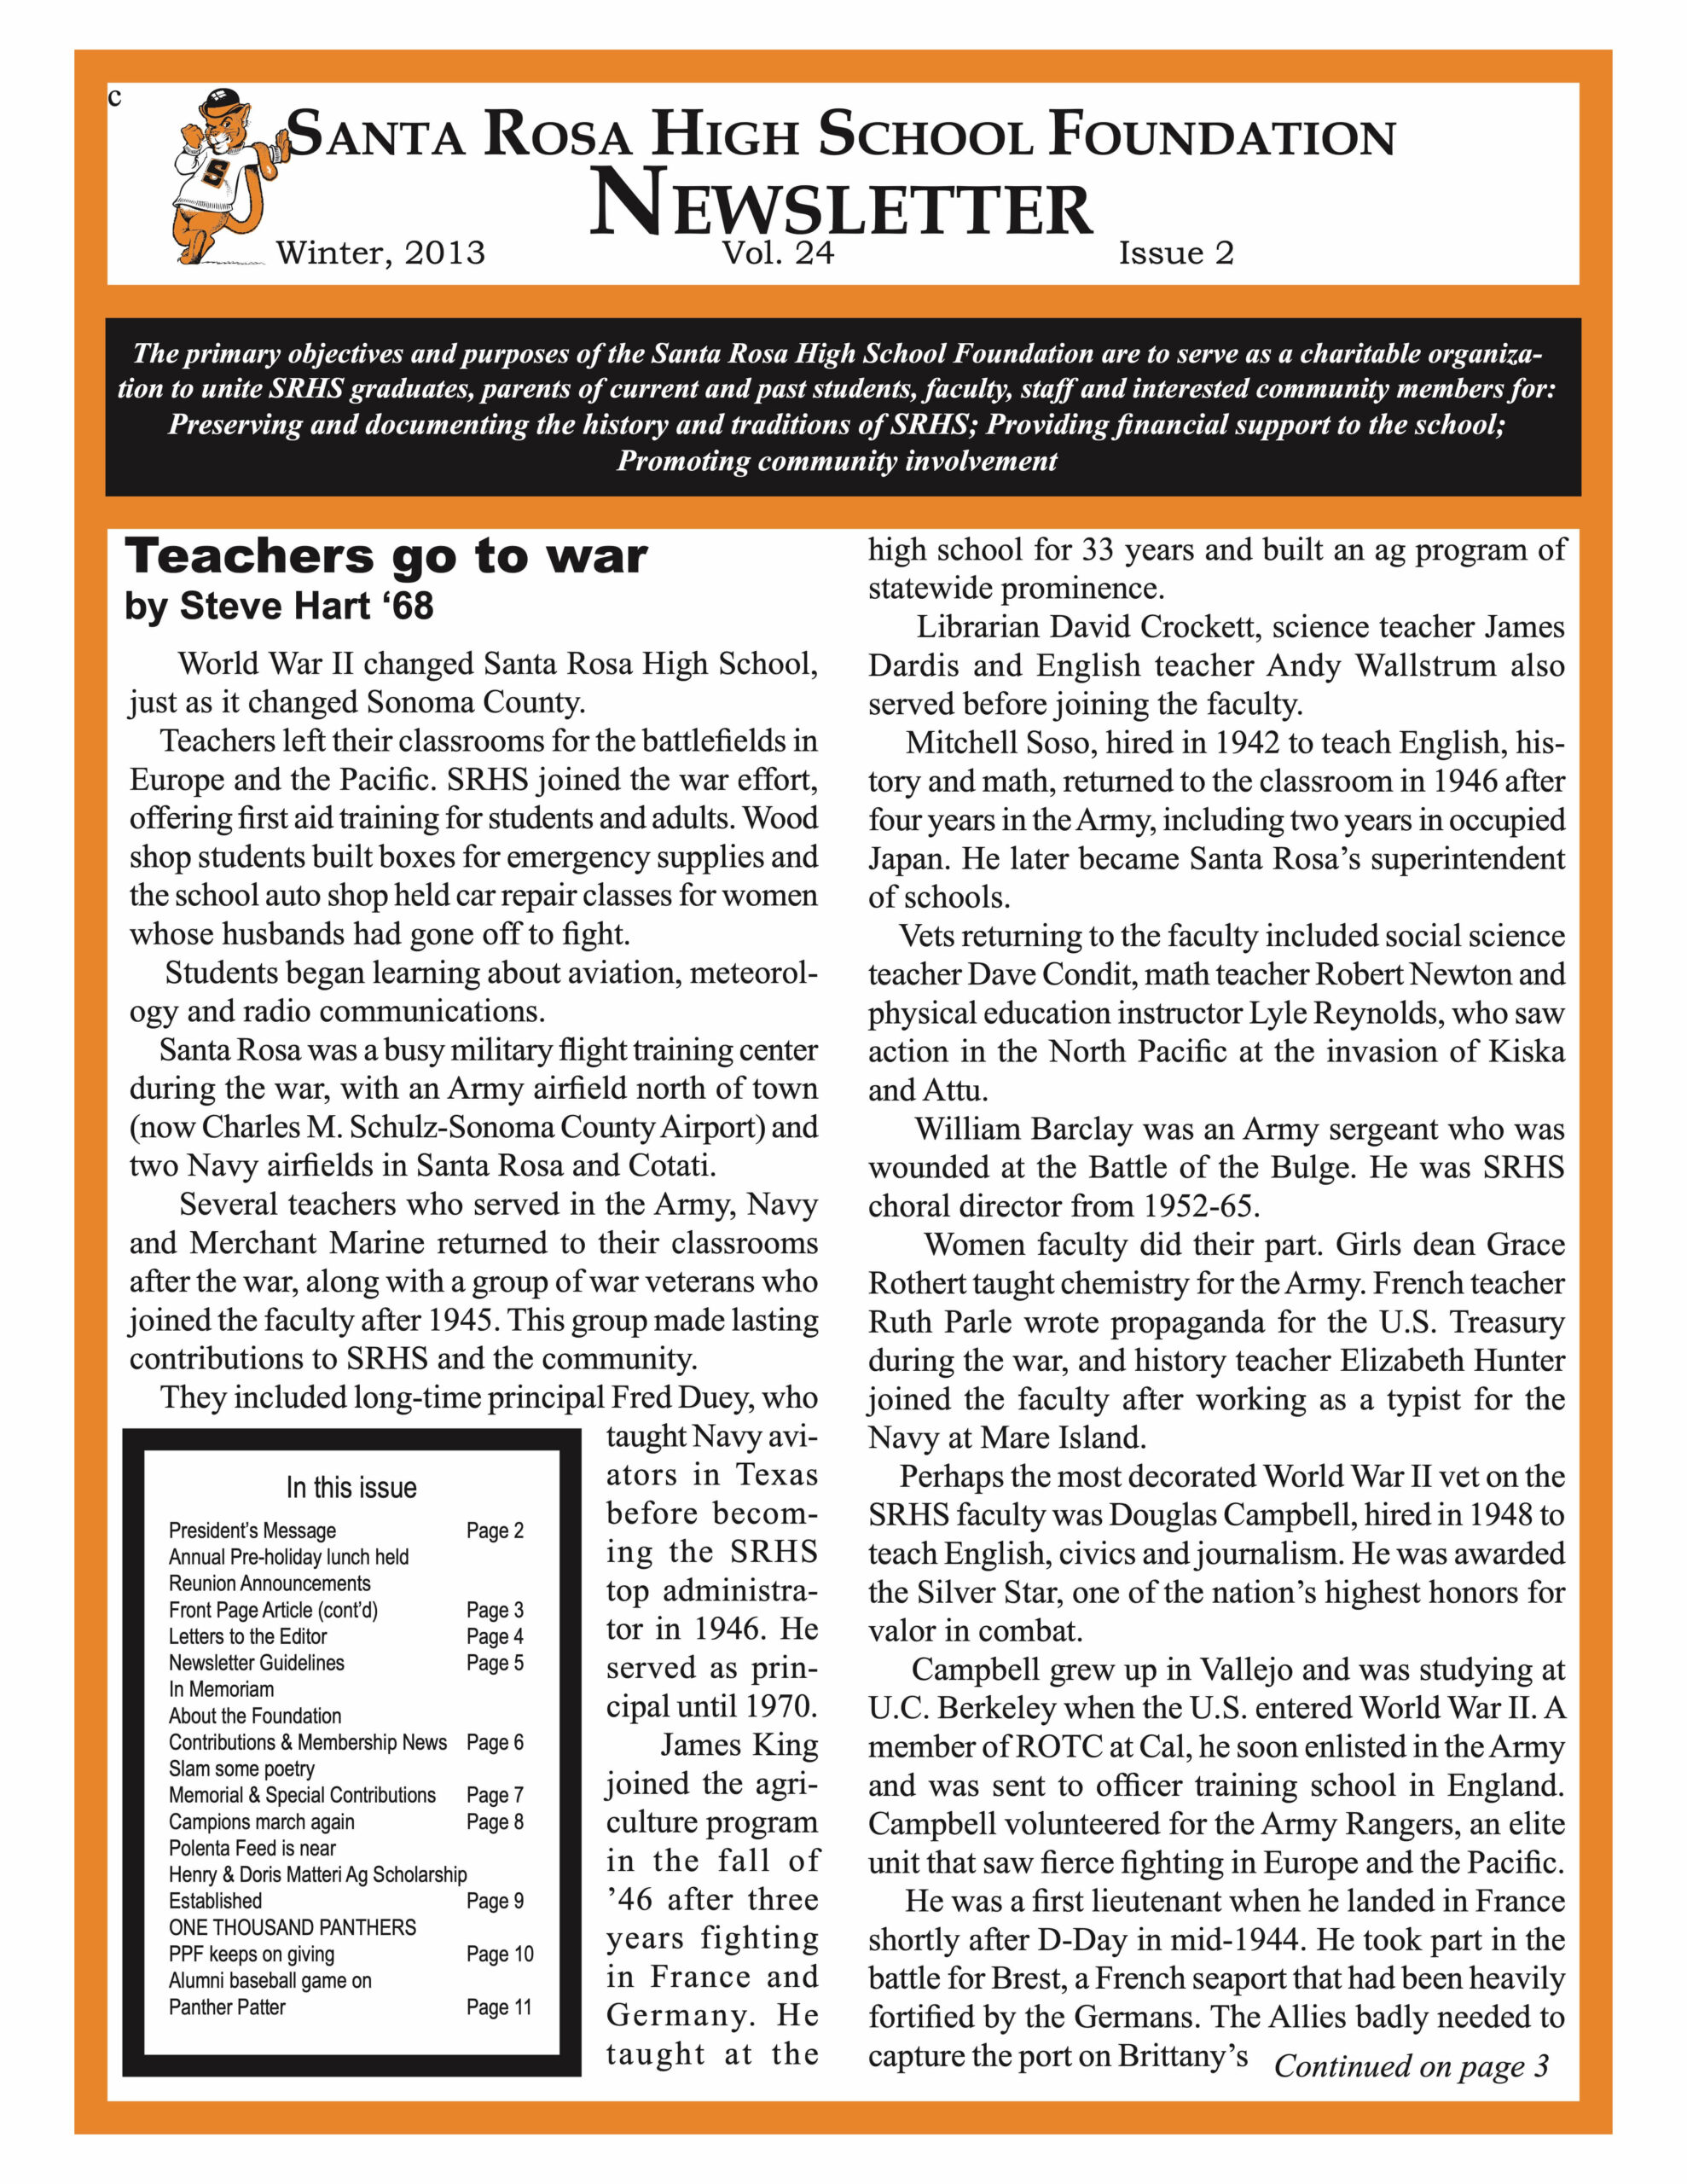 Newsletter front page - Winter 2013